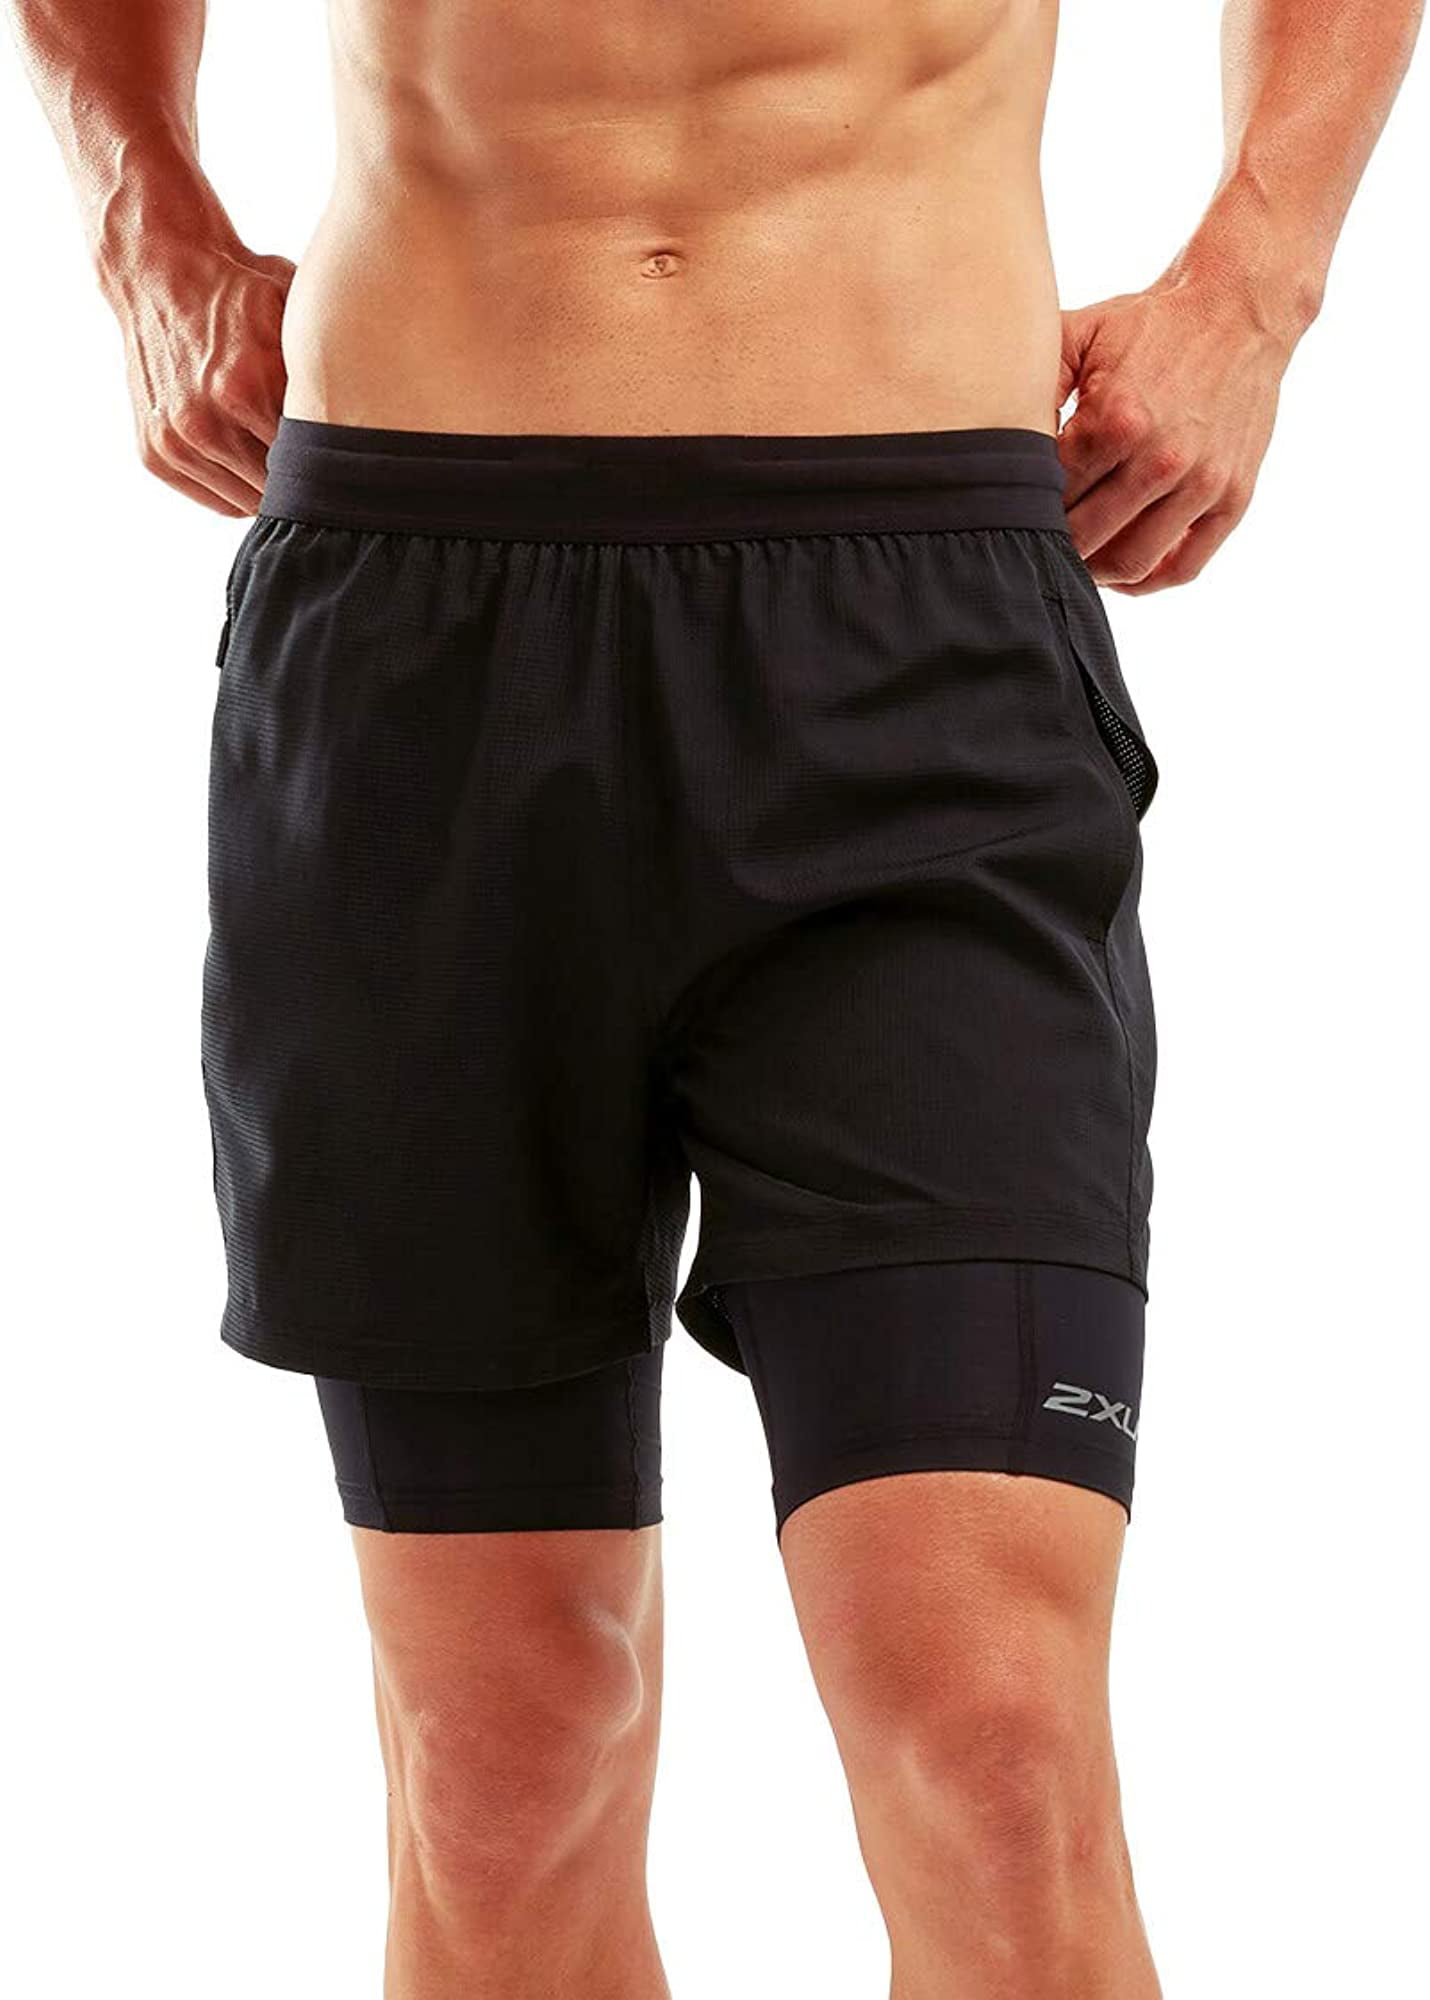 Black 2XU Mens XVENT 7" 2 in 1 Compression Shorts Pants Trousers Bottoms 